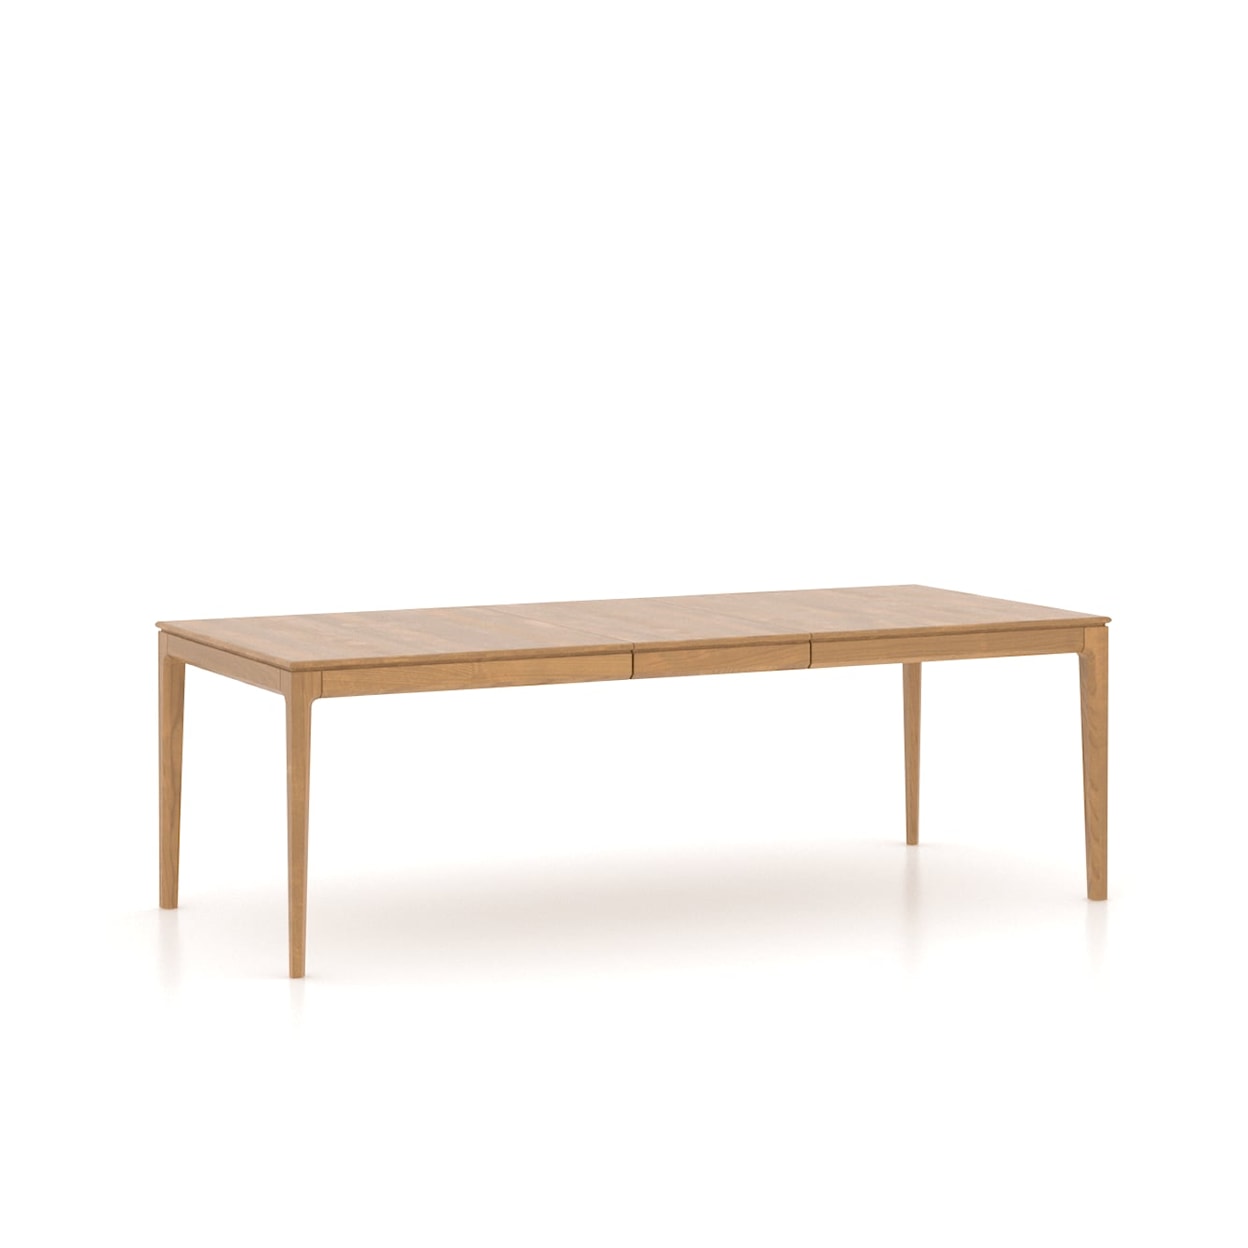 Canadel Downtown Rectangular wood table